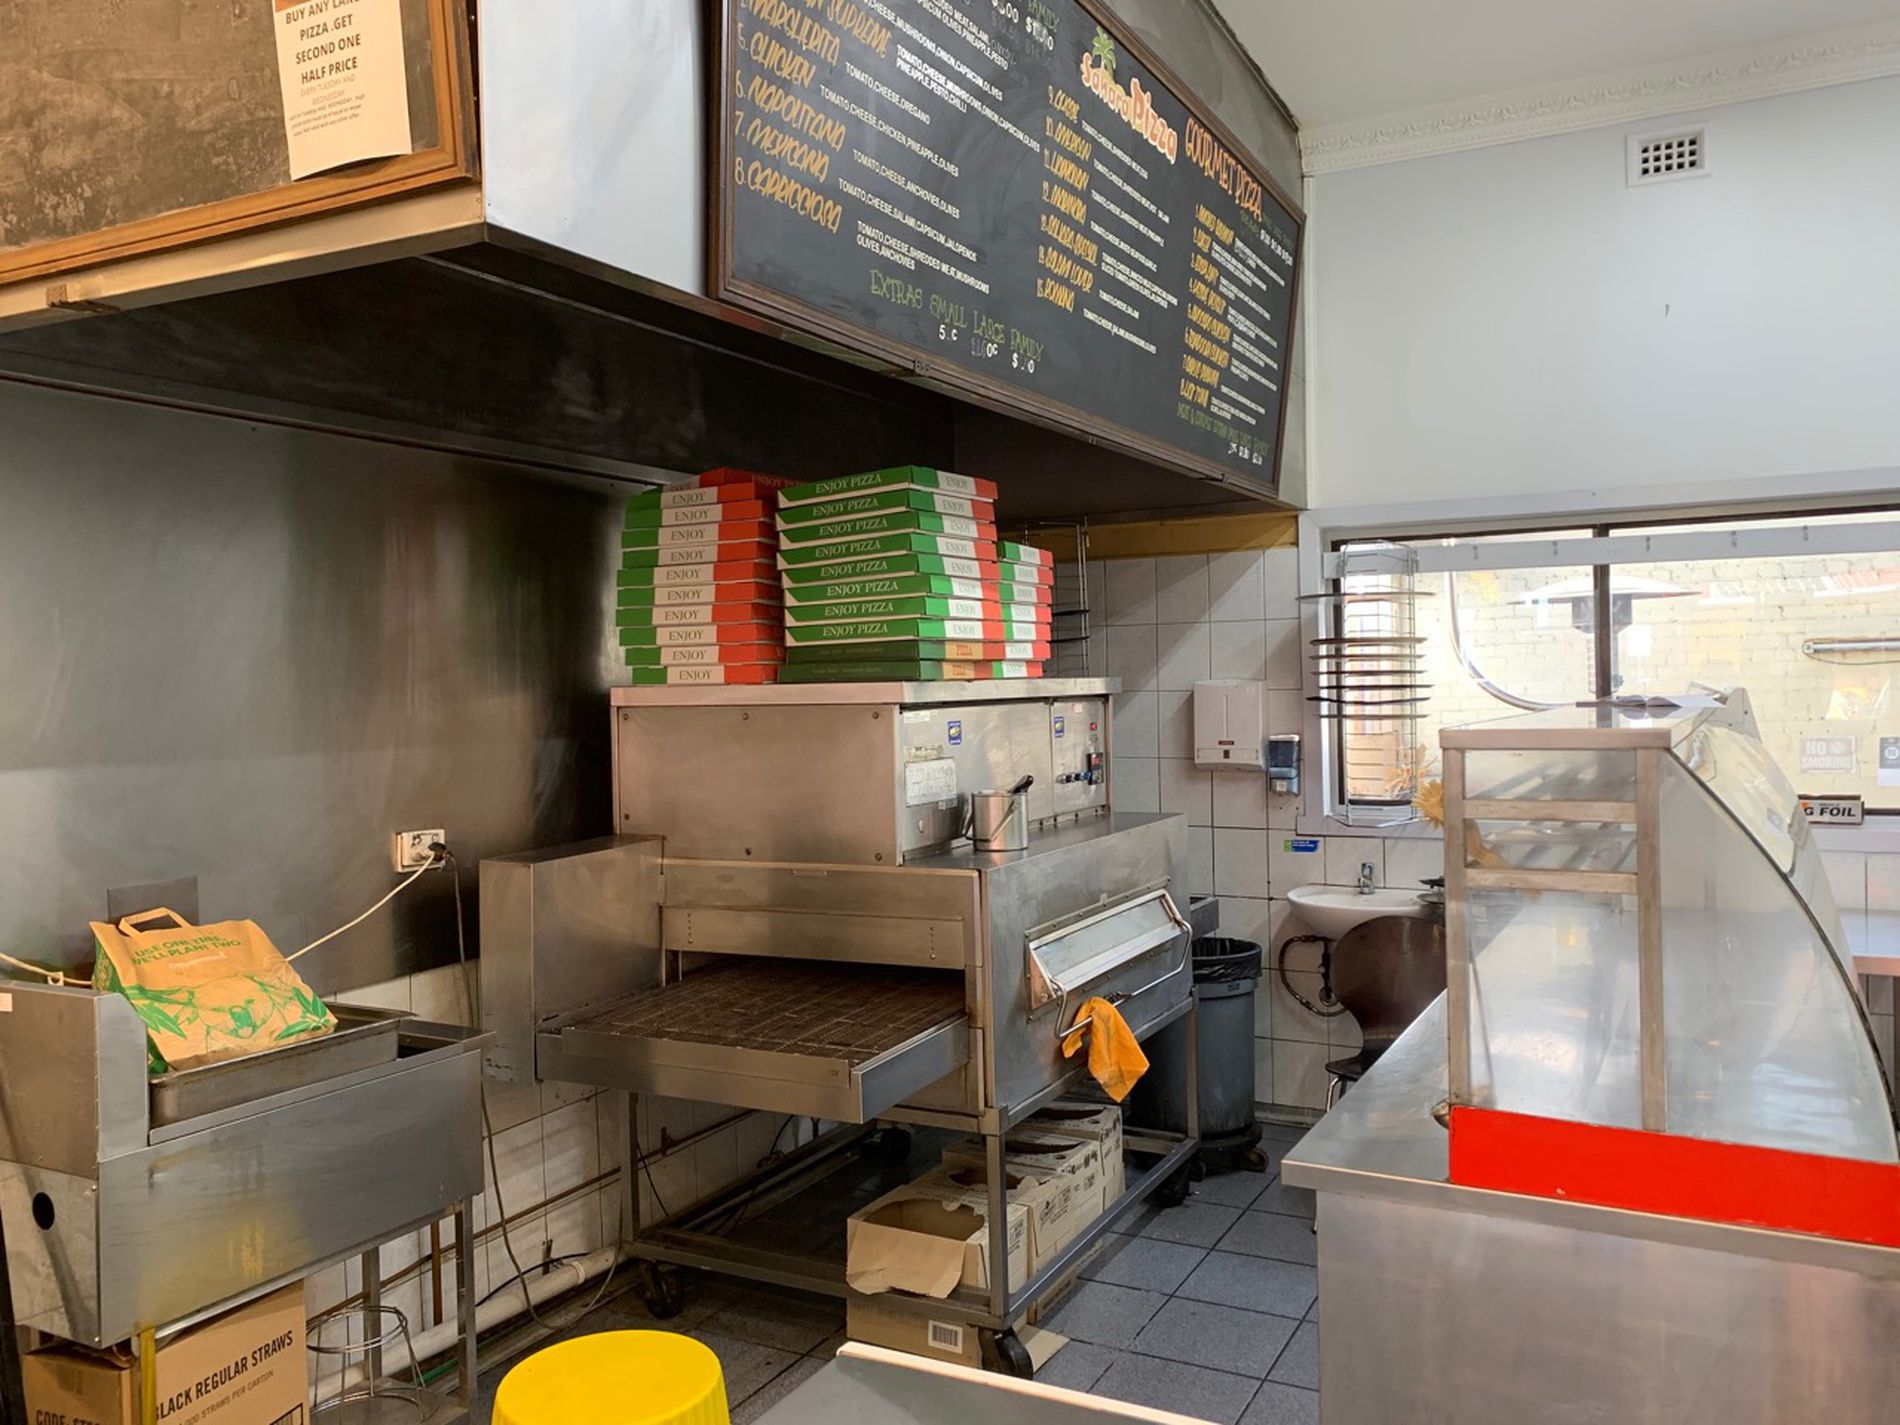 Kebab and Pizza Cafe and Takeaway Business for Sale